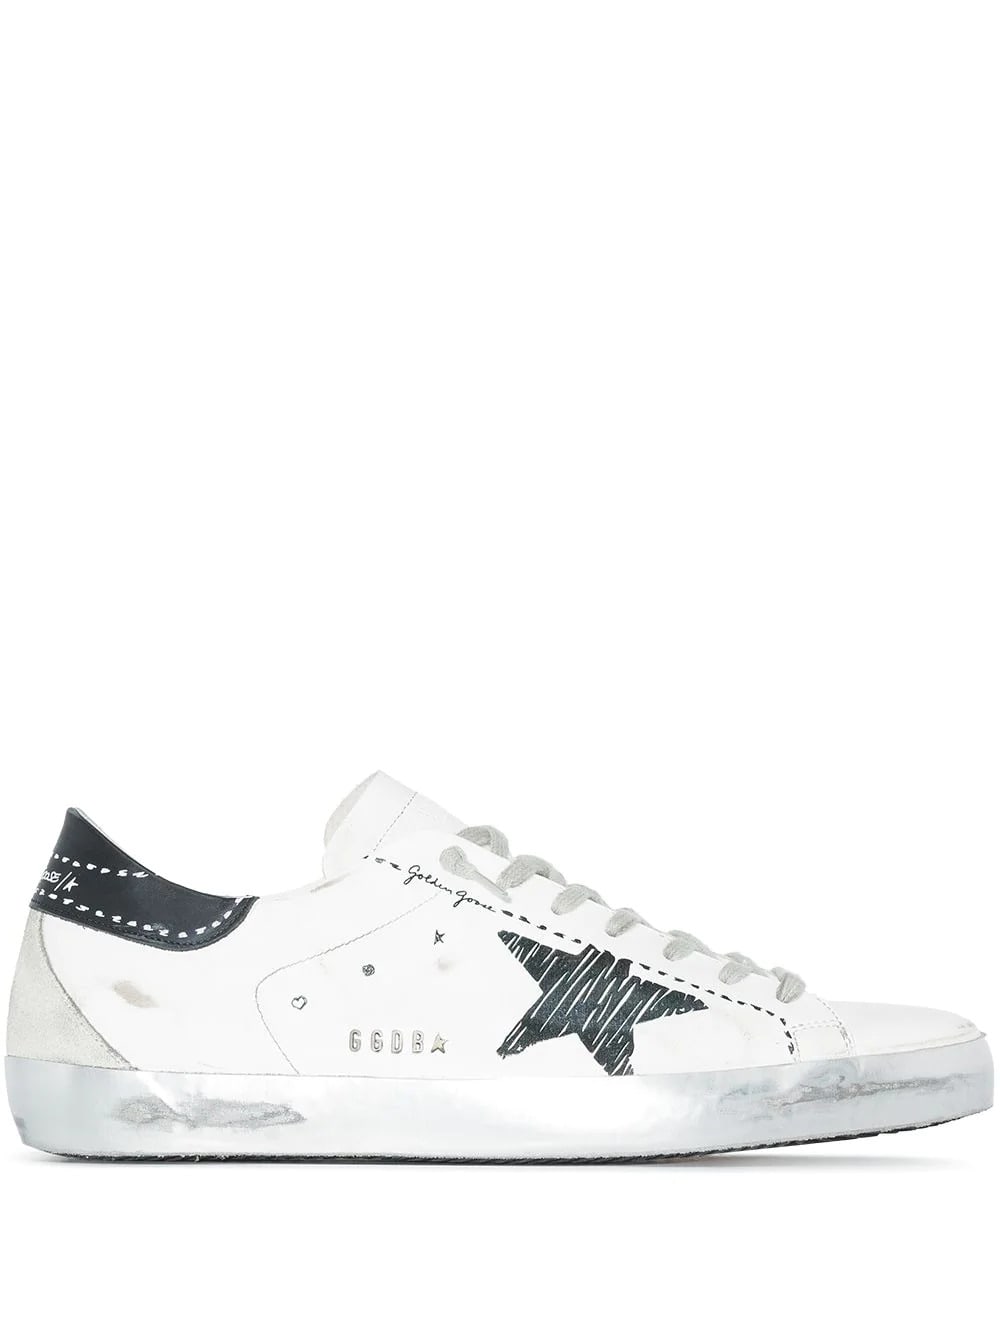 Golden Goose Man White Super-star Sneakers With Black Spoiler And Printed Details